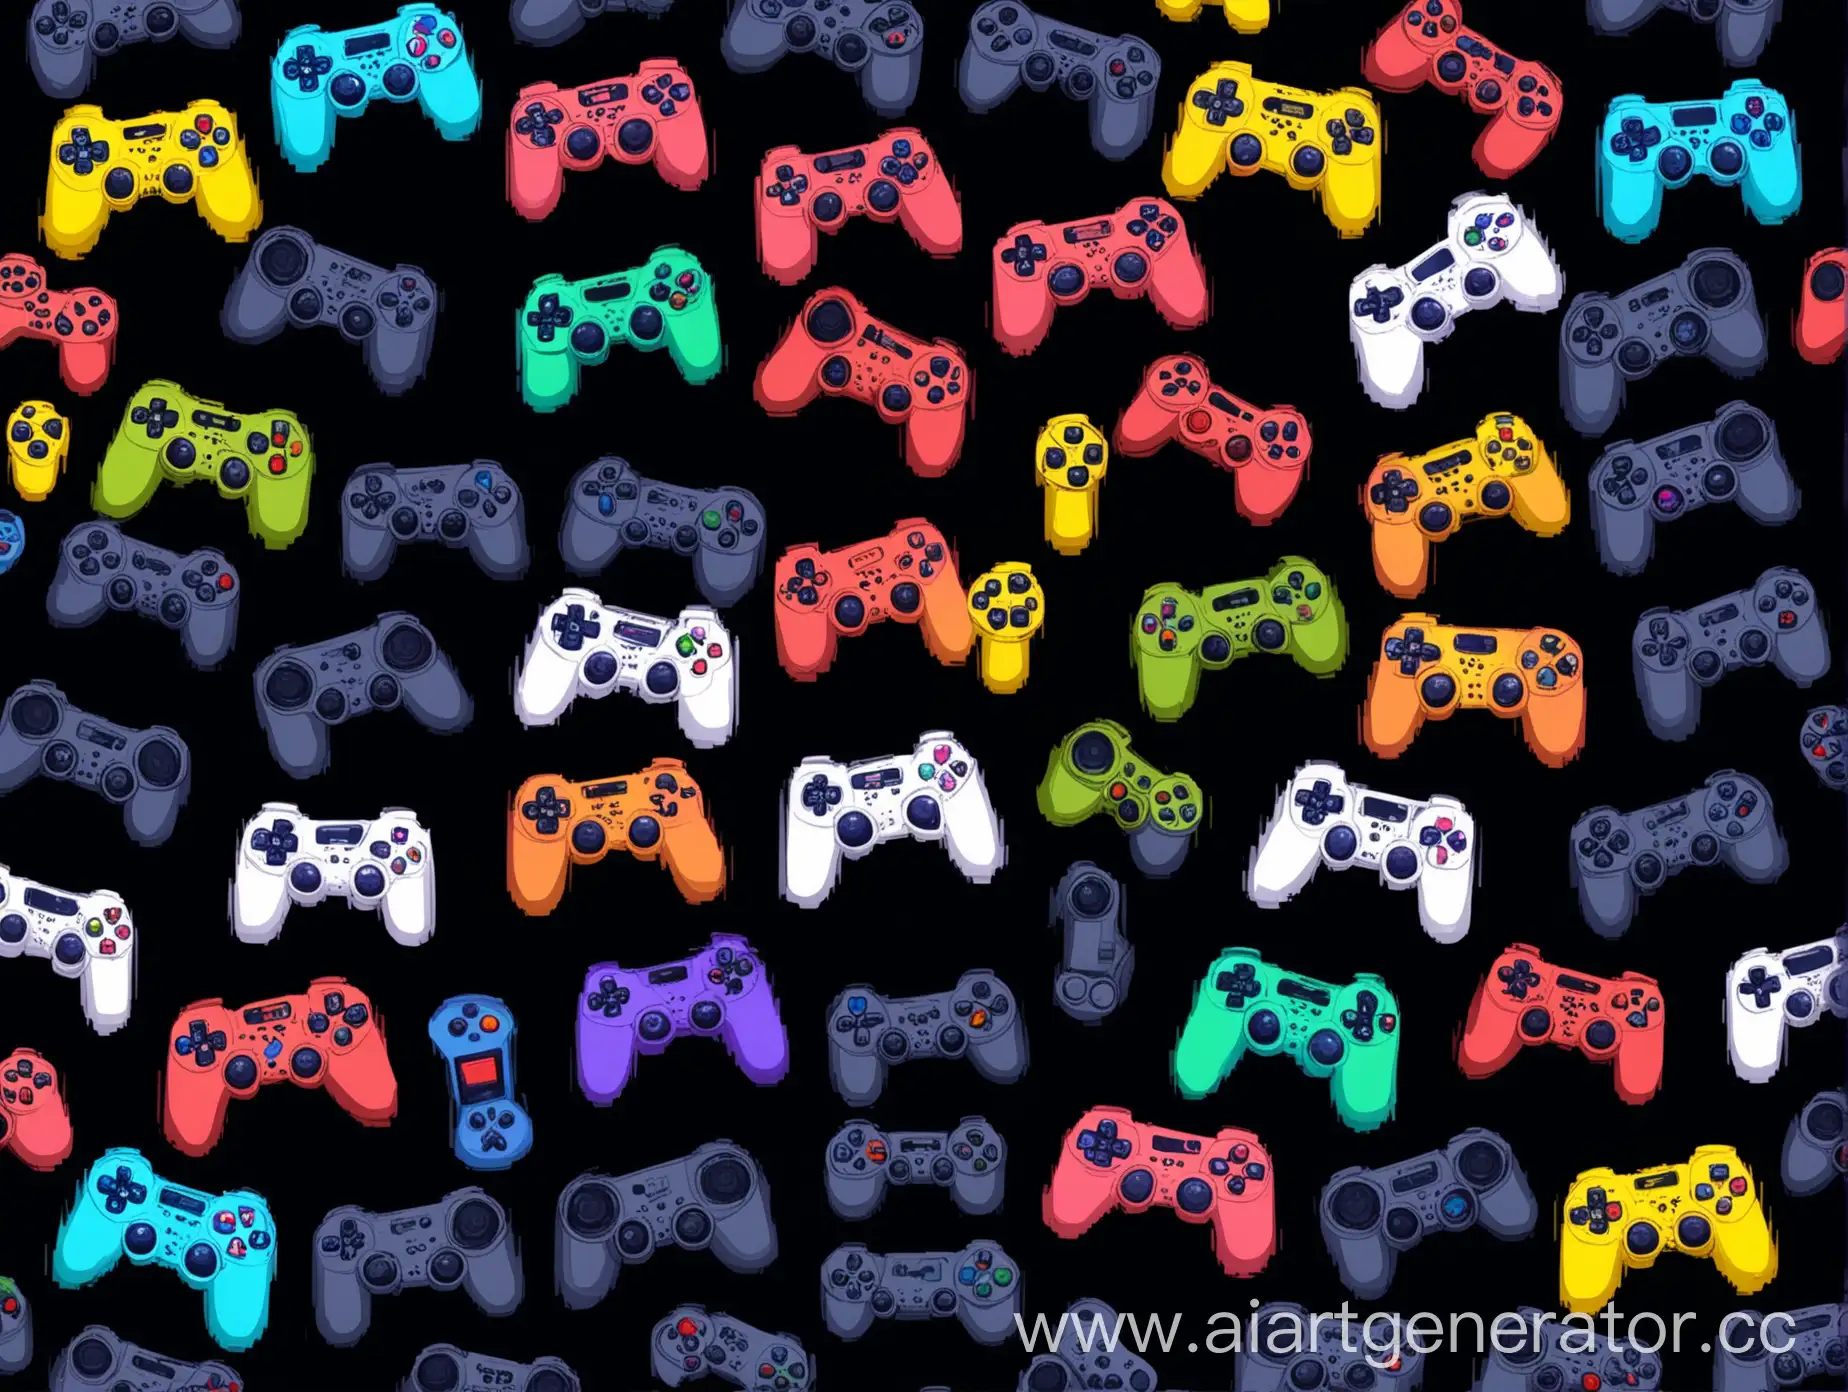 Colorful-Gamepad-Collection-on-Dark-Background